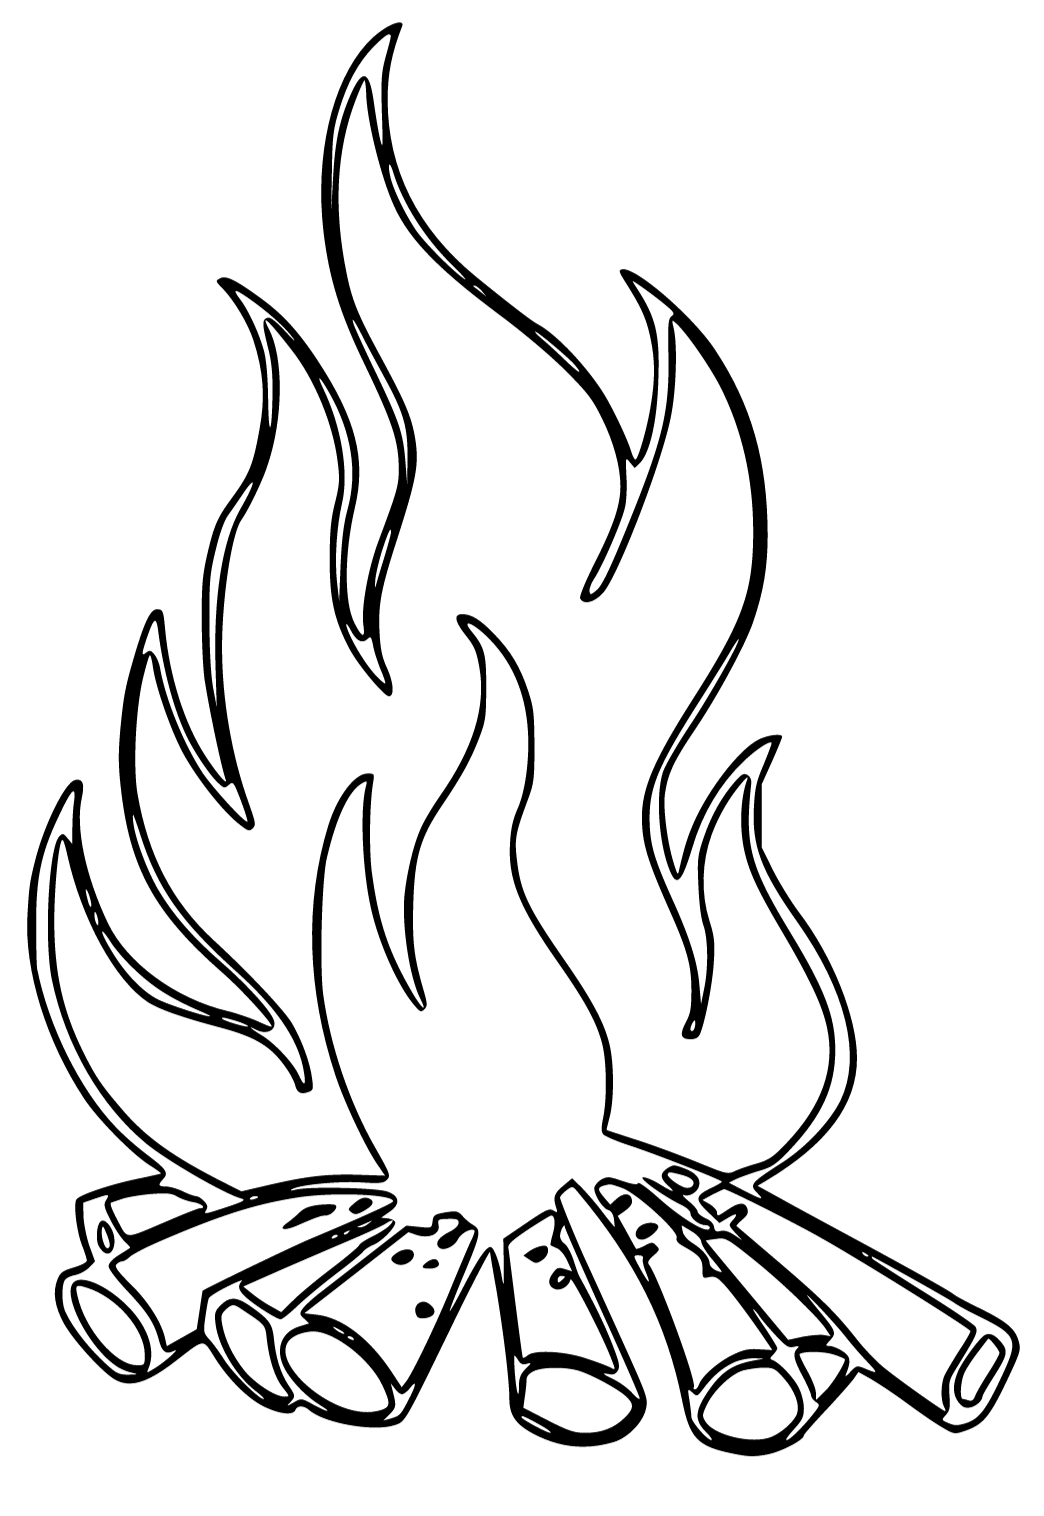 Free printable fire flame coloring page for adults and kids